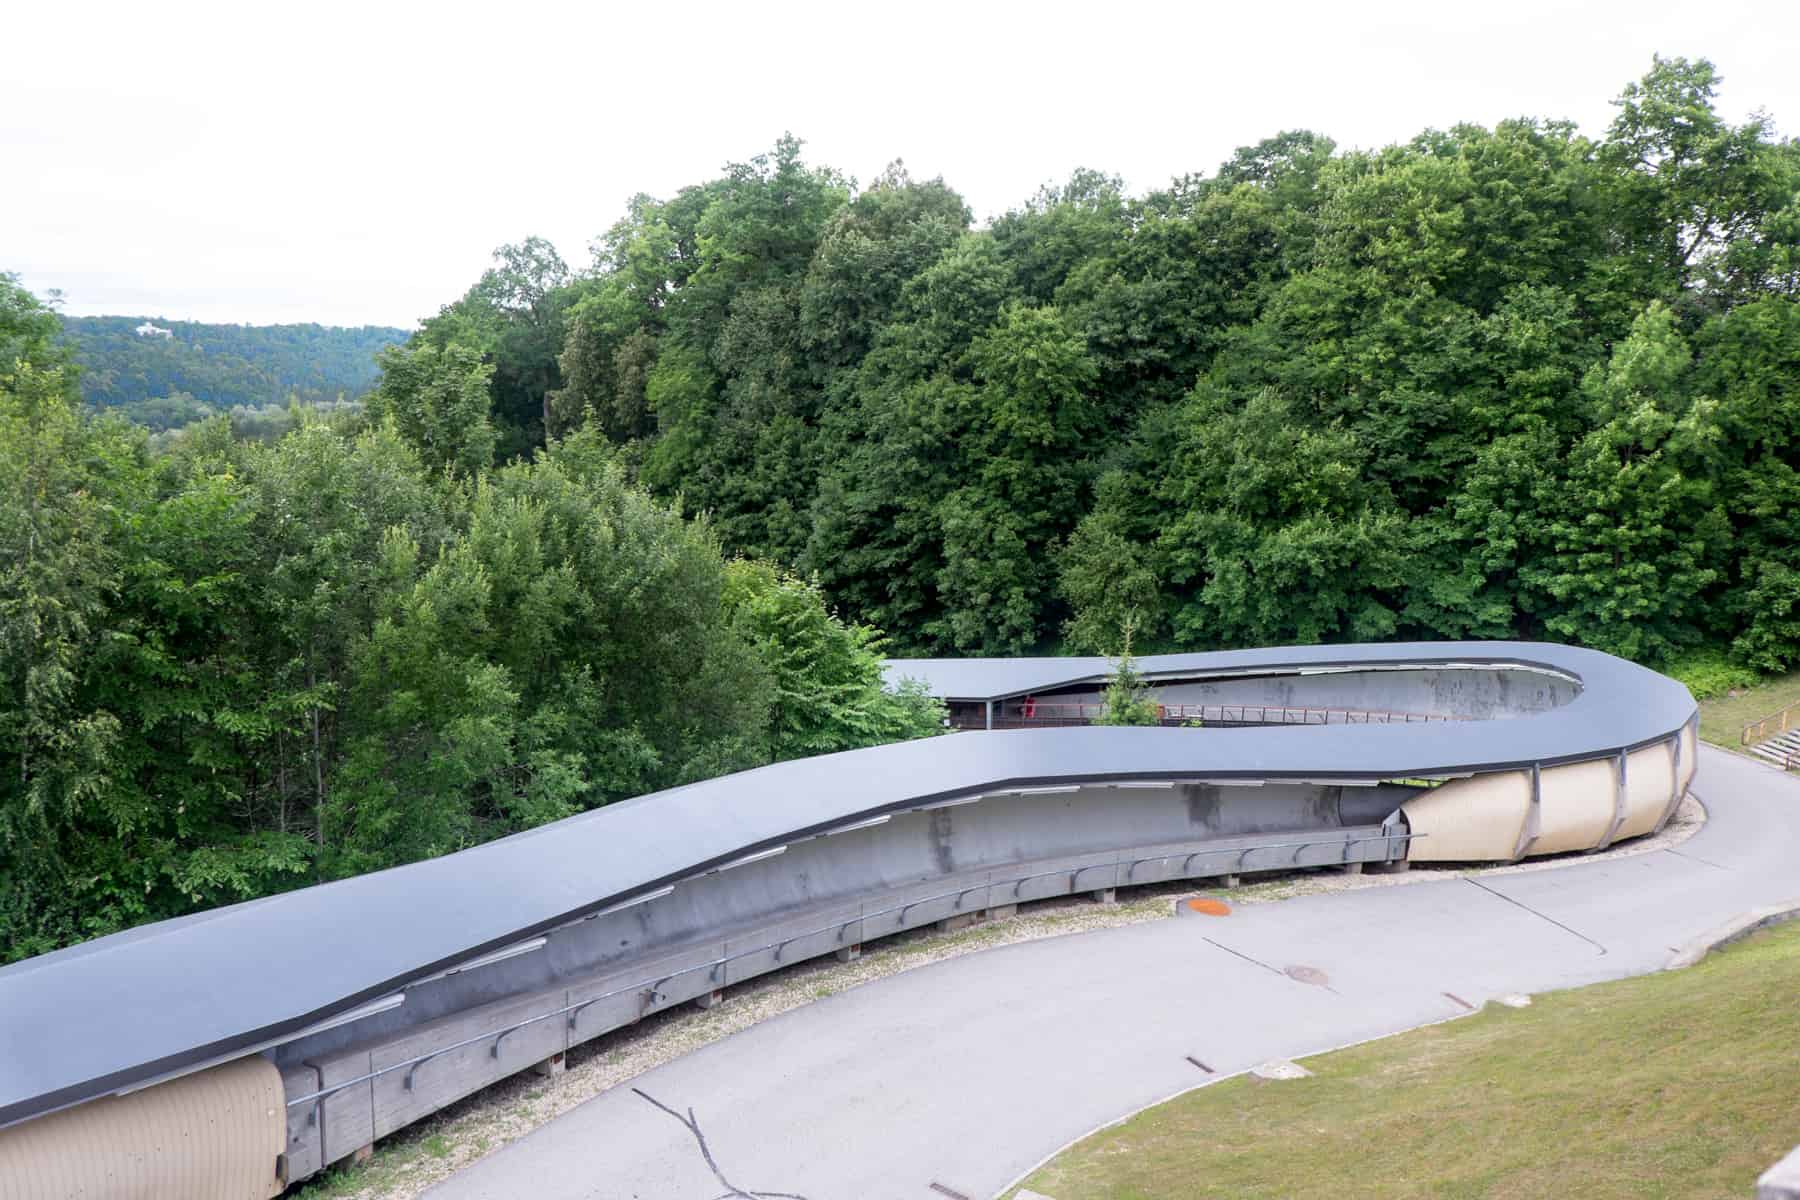 A grey looped tunnel curves left and towards between two lanes of trees. it is the Olympic bobsleigh in Sigulda, Latvia